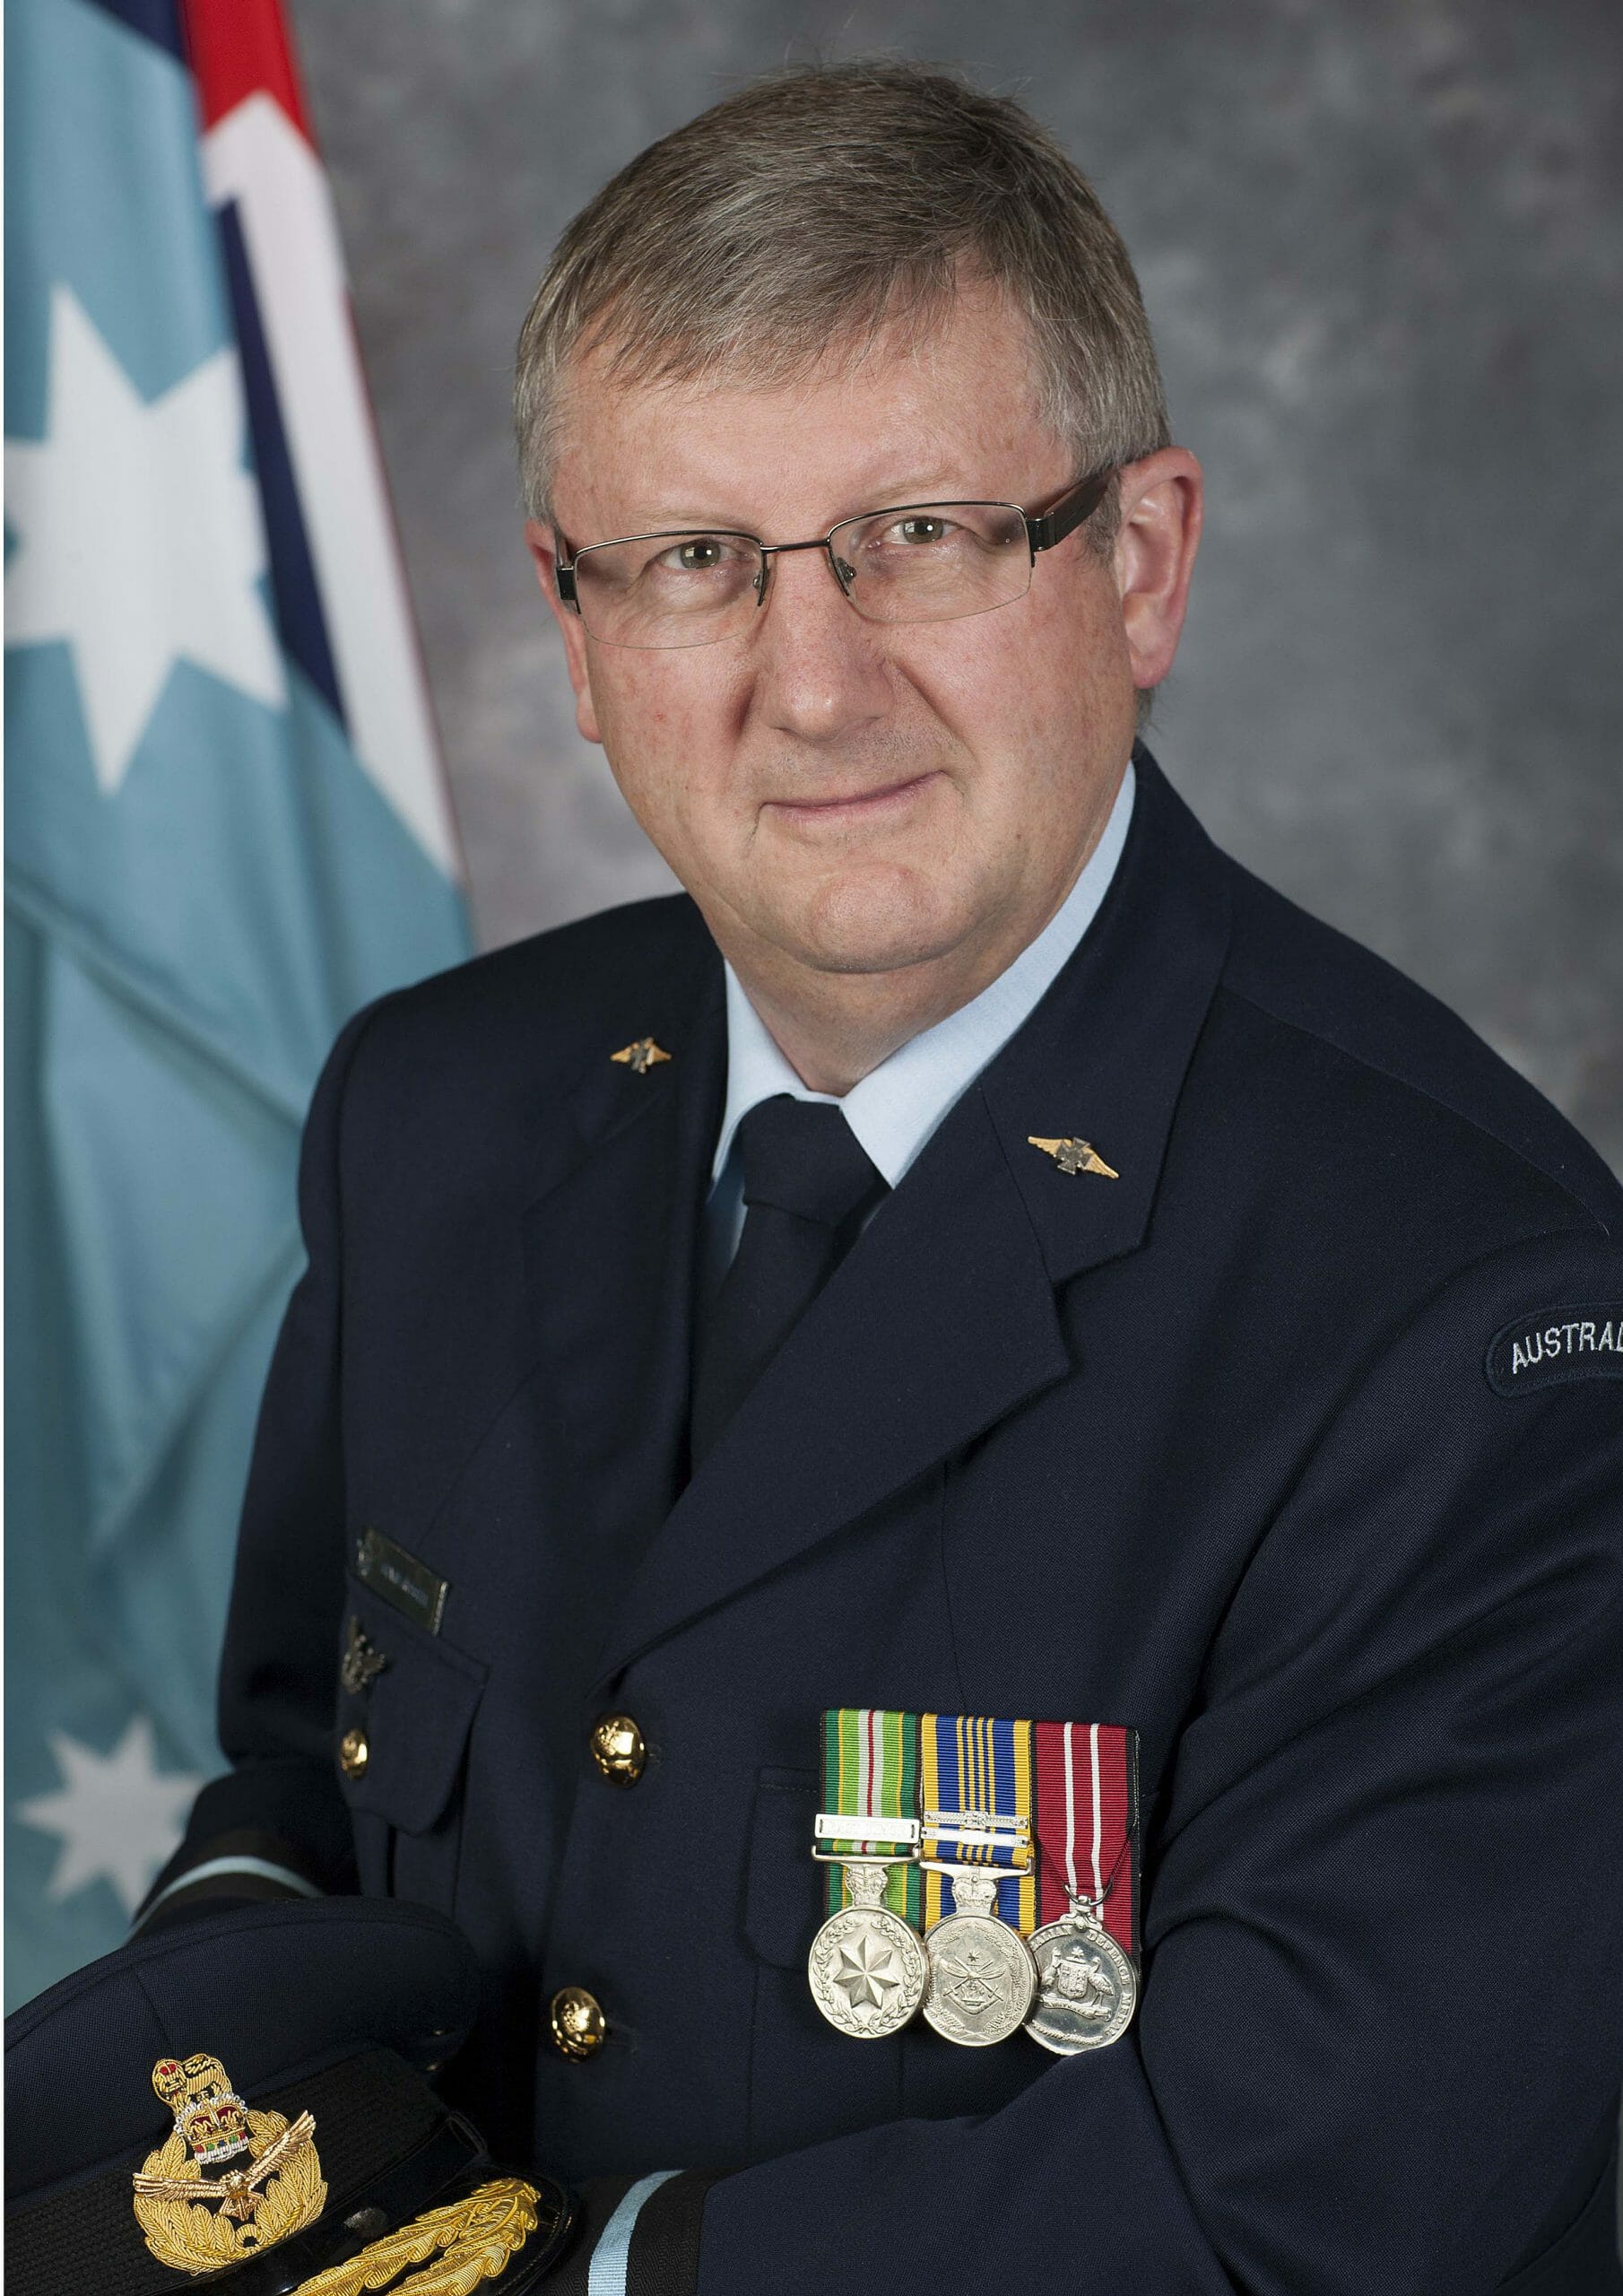 by Chaplain Kevin Russell Archdeacon to the Royal Australian Air Force